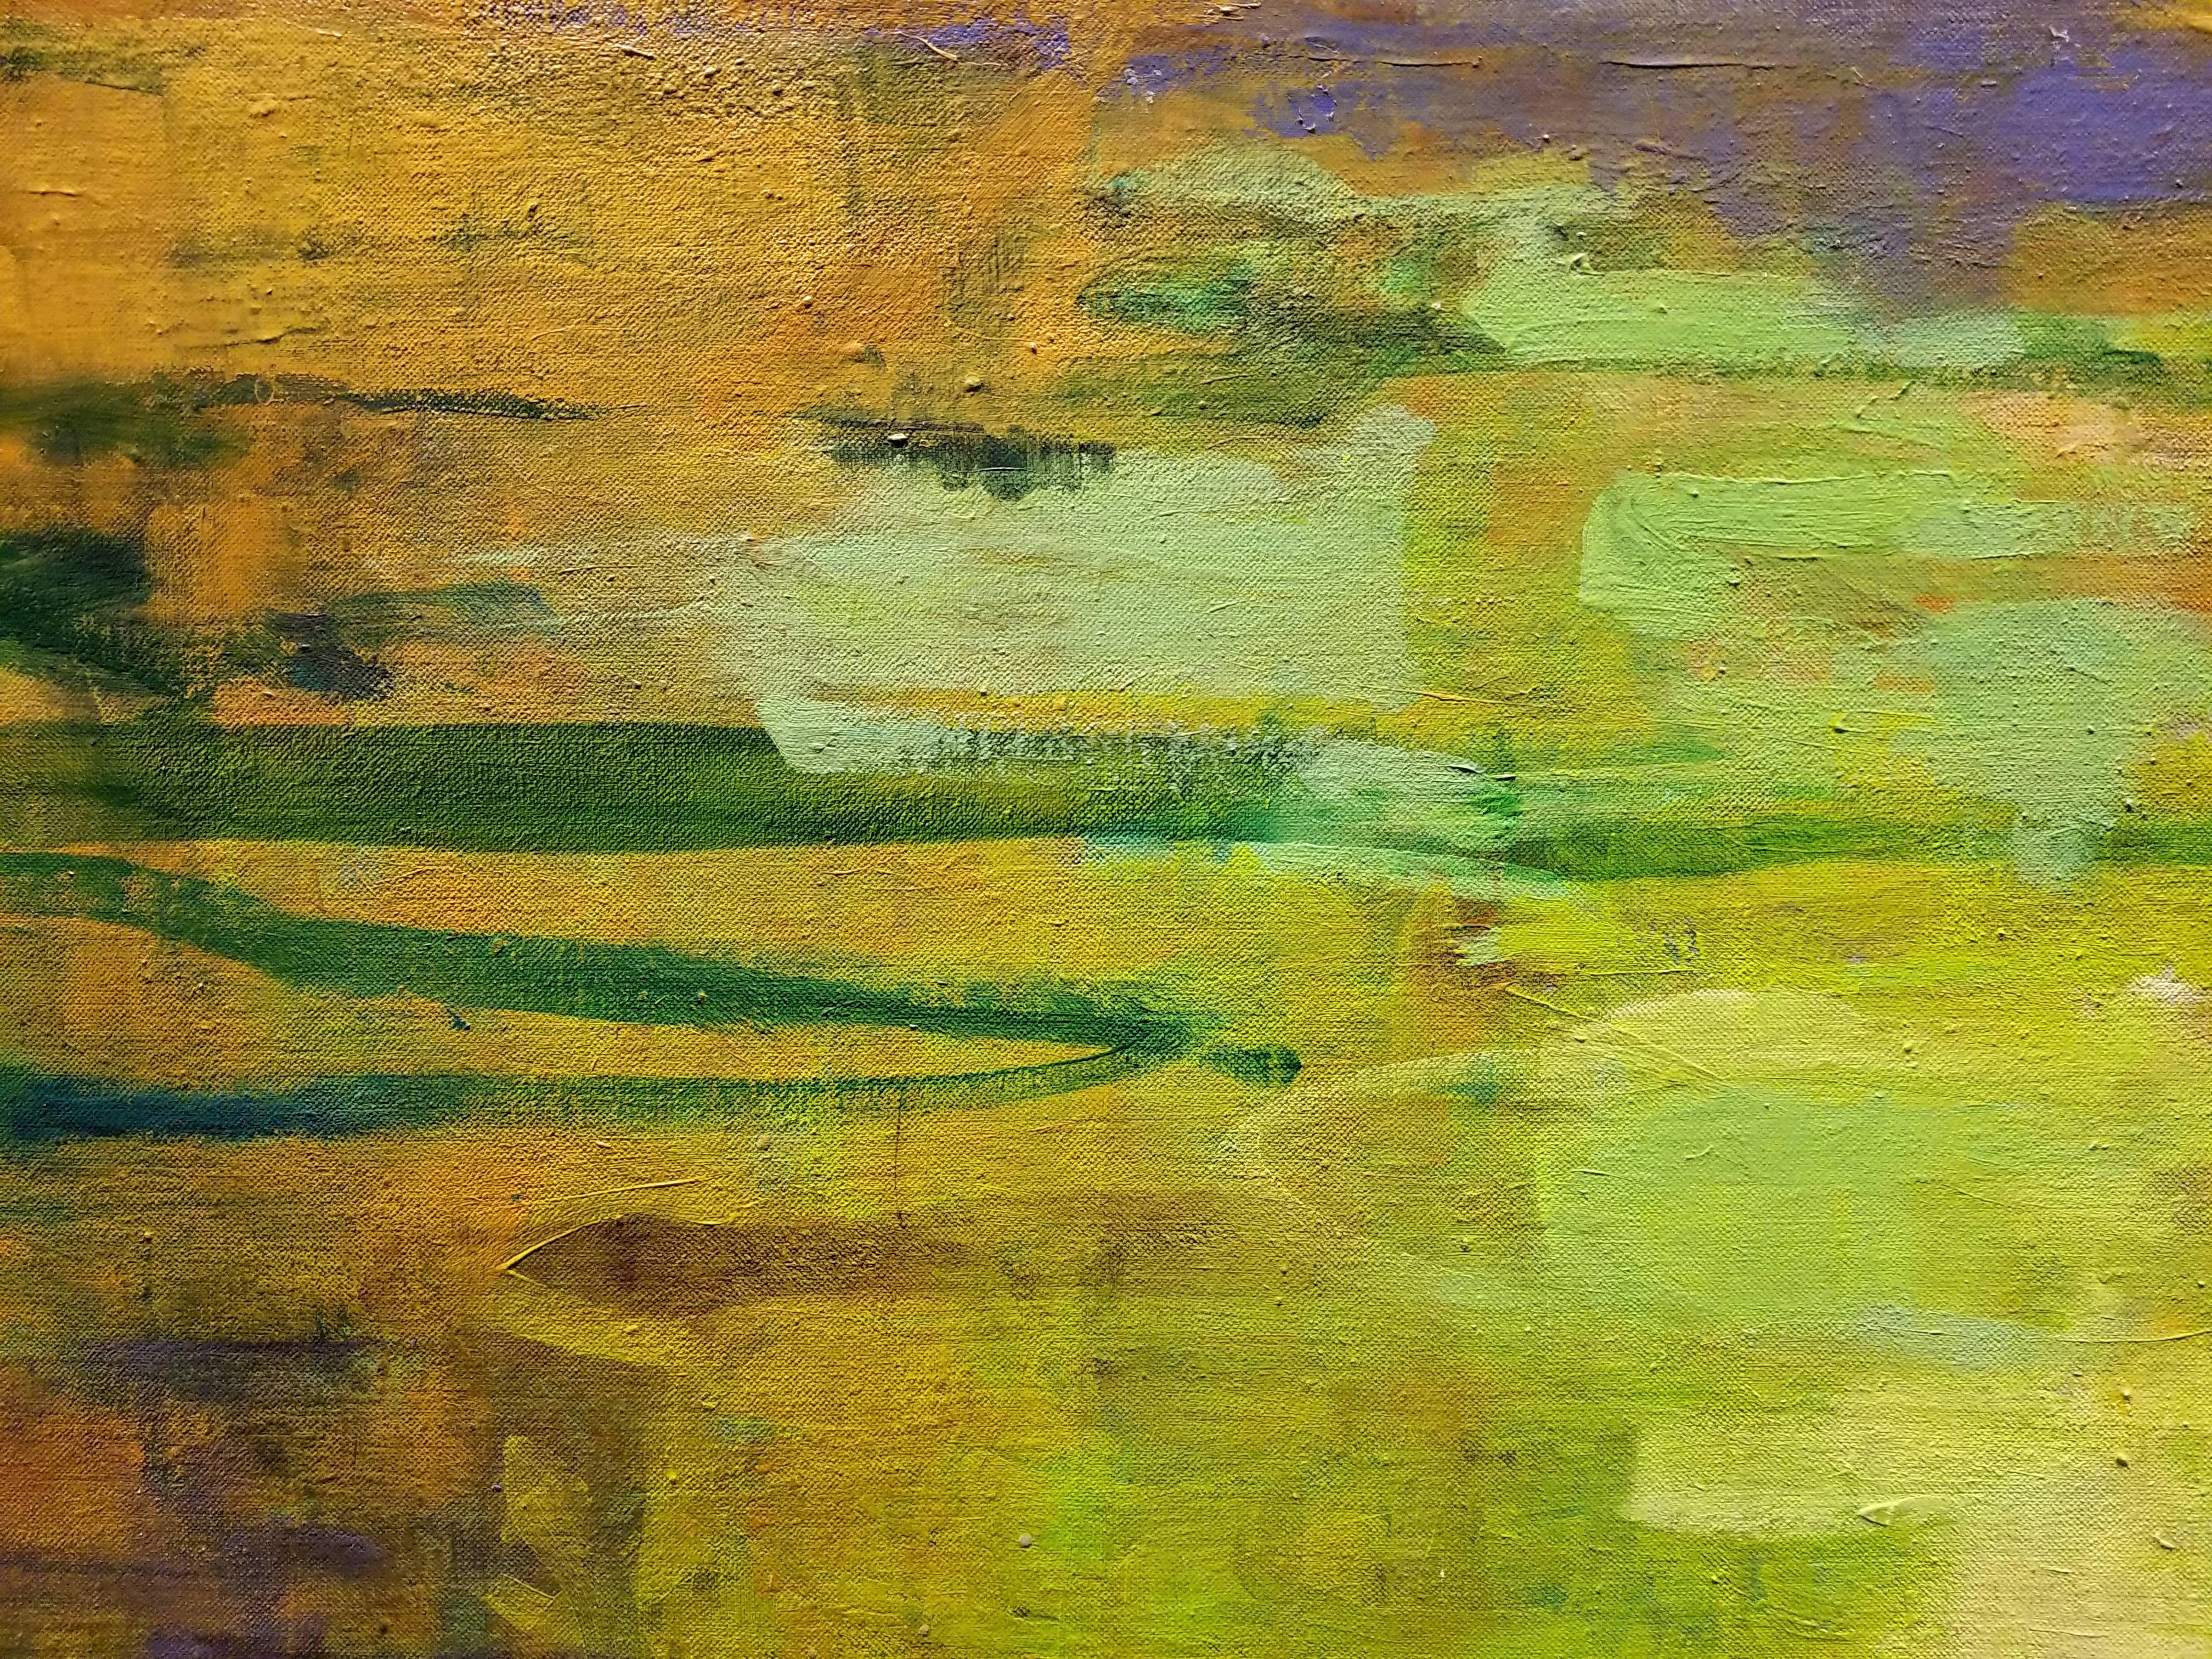 This acrylic painting depicts and abstracted open, sunny landscape using bright yellow, green, and bright blue and using visible, textured brushwork.

Born in Lowell, Massachusetts in 1947, Baart’s work has stayed true to his New England